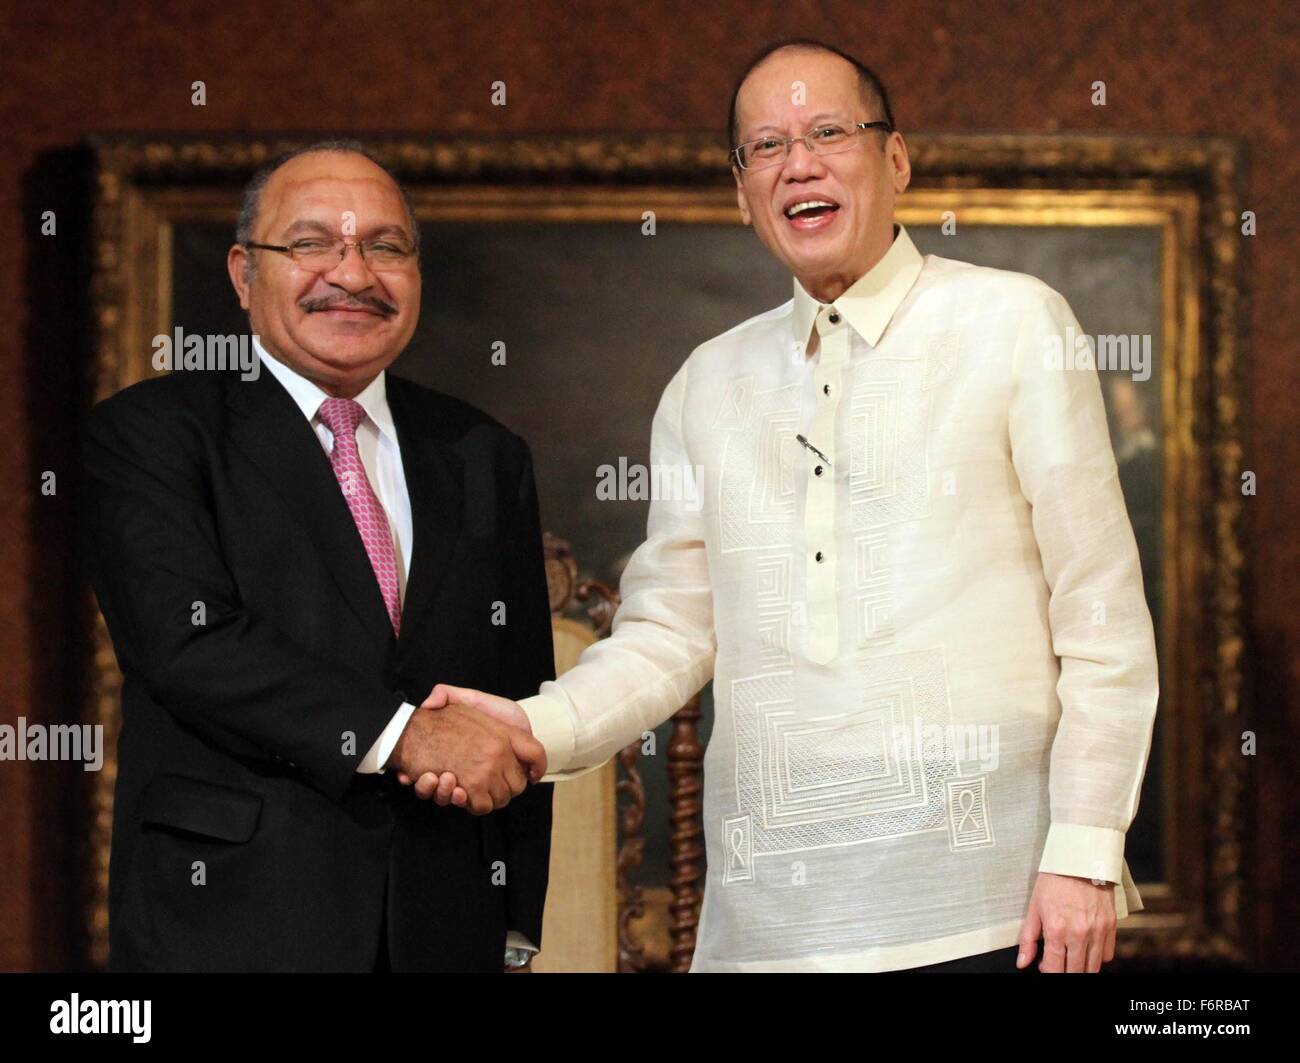 Philippine President Benigno Aquino III welcomes Papua New Guinea Prime Minister Peter O'Neill, left, before their bilateral meeting on the sidelines of the APEC Leaders Summit at the Malacanang Palace November 17, 2015 in Manila, Philippines. Stock Photo